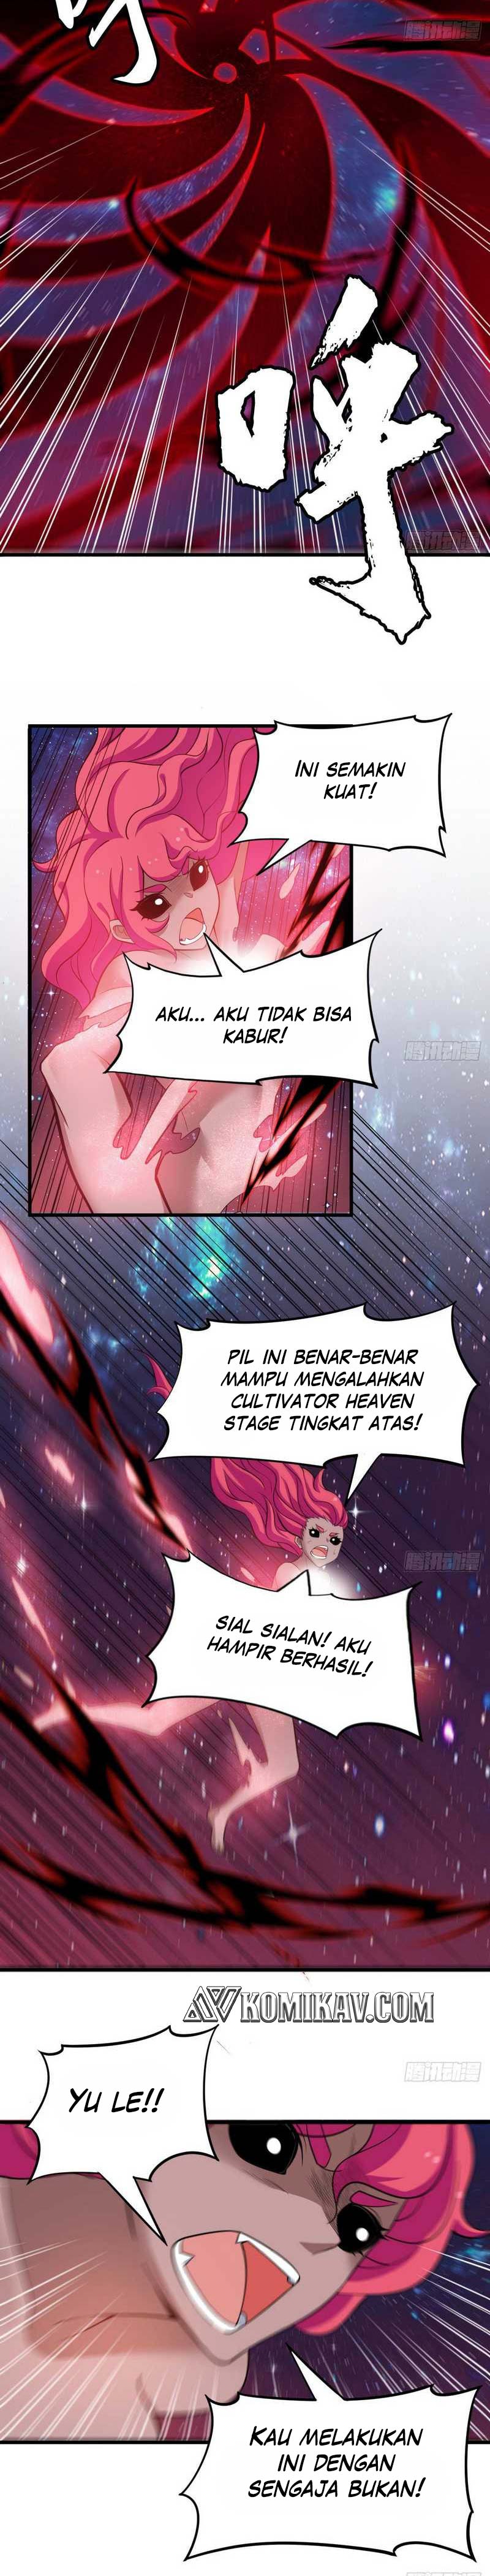 Dilarang COPAS - situs resmi www.mangacanblog.com - Komik i just want to be beaten to death by everyone 098 - chapter 98 99 Indonesia i just want to be beaten to death by everyone 098 - chapter 98 Terbaru 8|Baca Manga Komik Indonesia|Mangacan